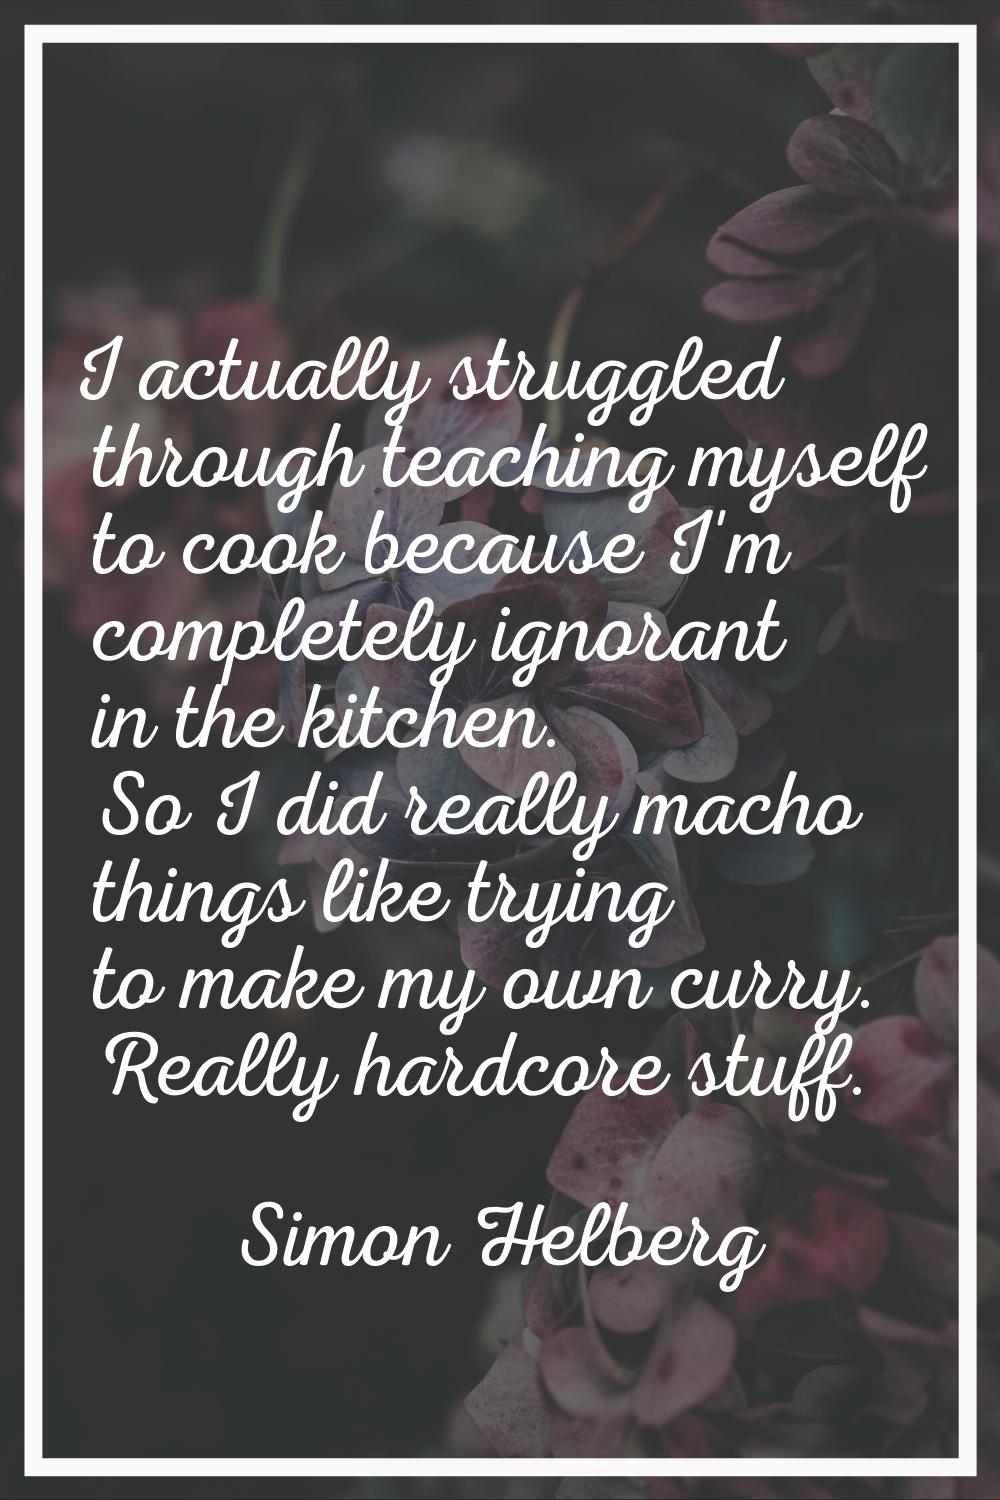 I actually struggled through teaching myself to cook because I'm completely ignorant in the kitchen